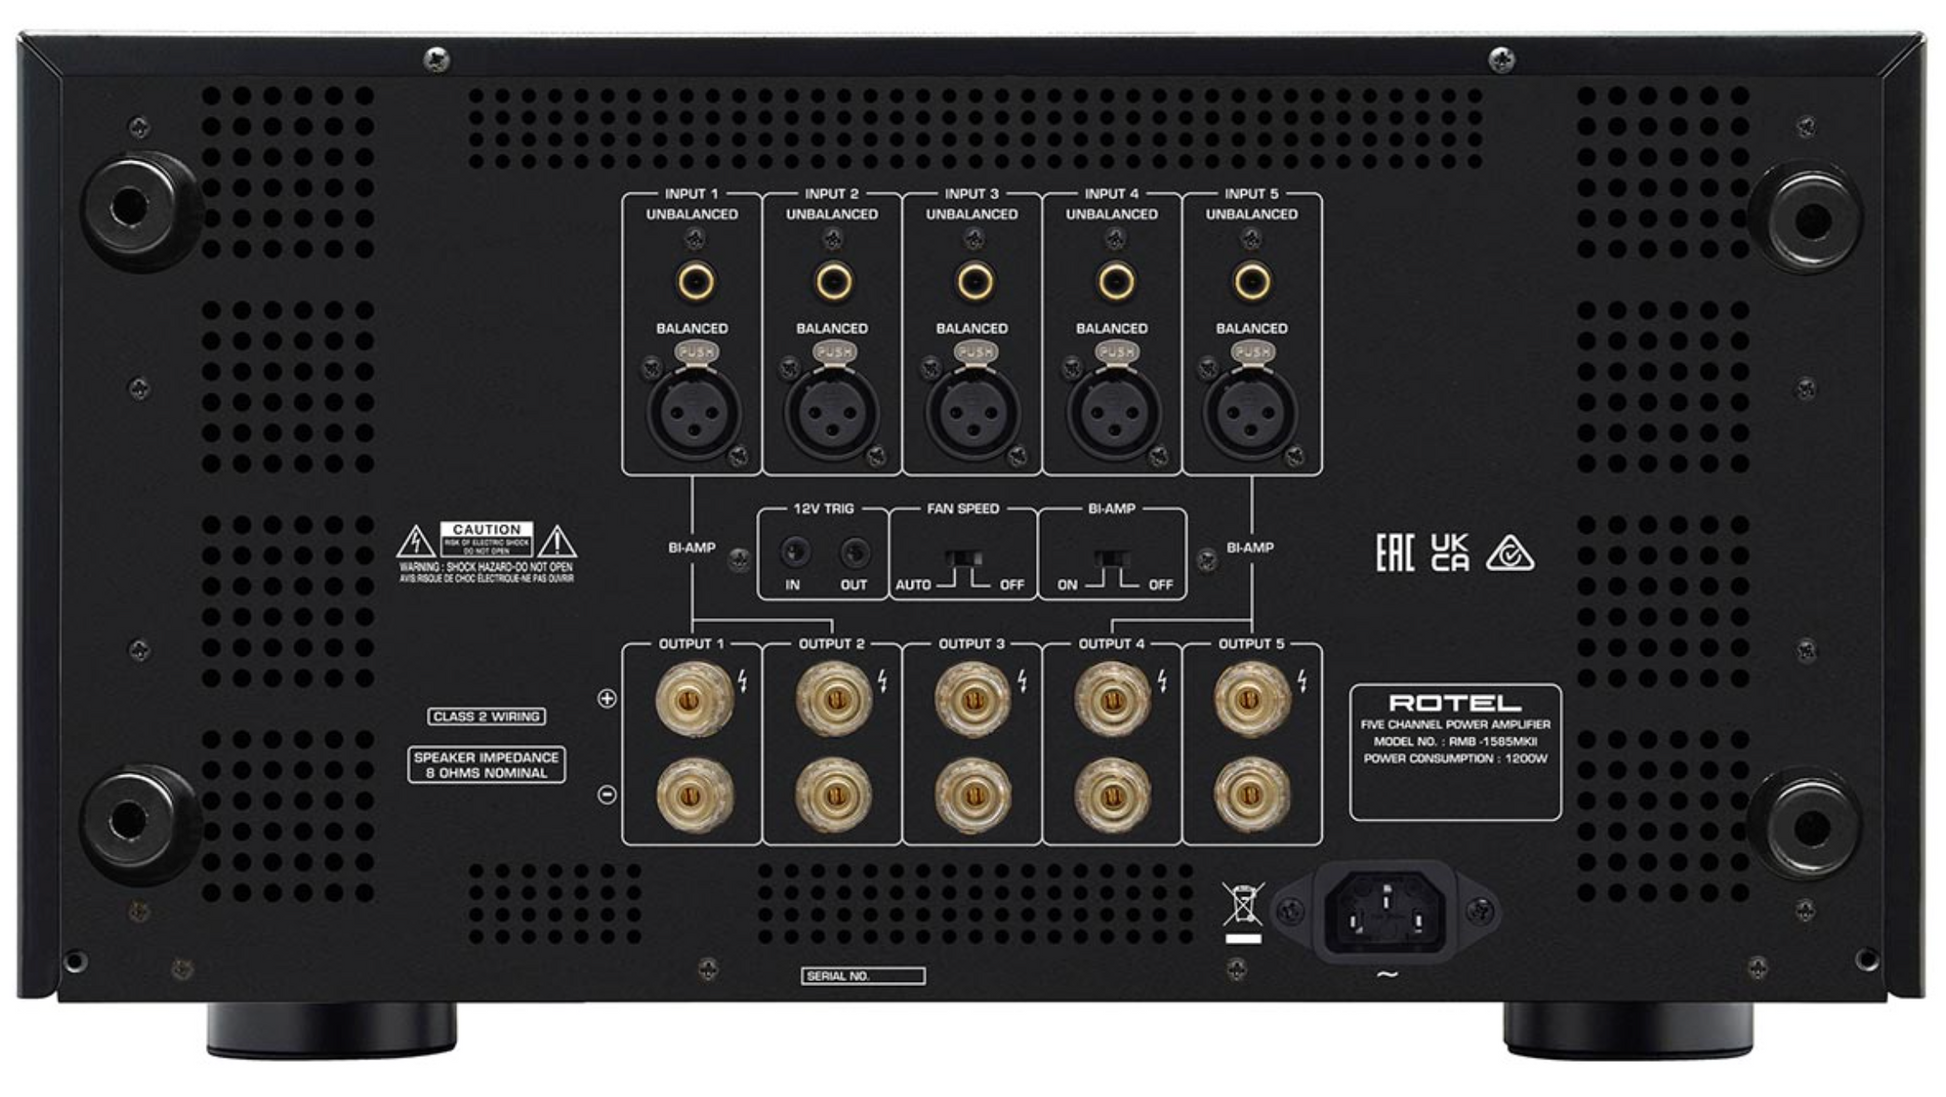 Rotel RMB-1587 MKII Multi-Channel Power Amplifier. Black rear panel image